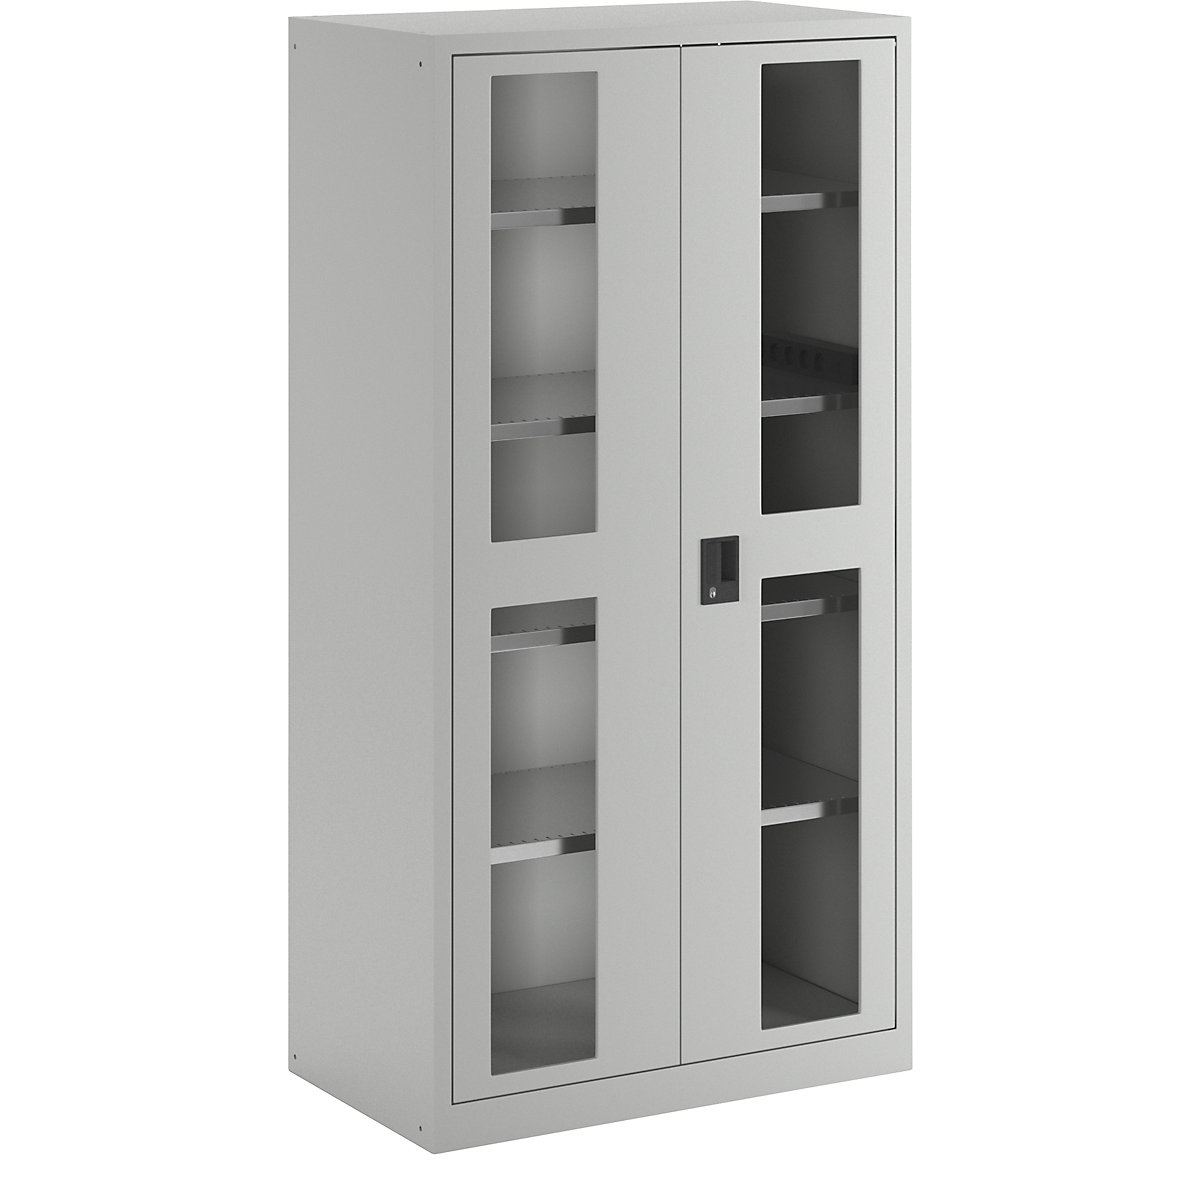 Battery charging cabinet – LISTA, 4 shelves, vision panel doors, power strip at side, grey-20